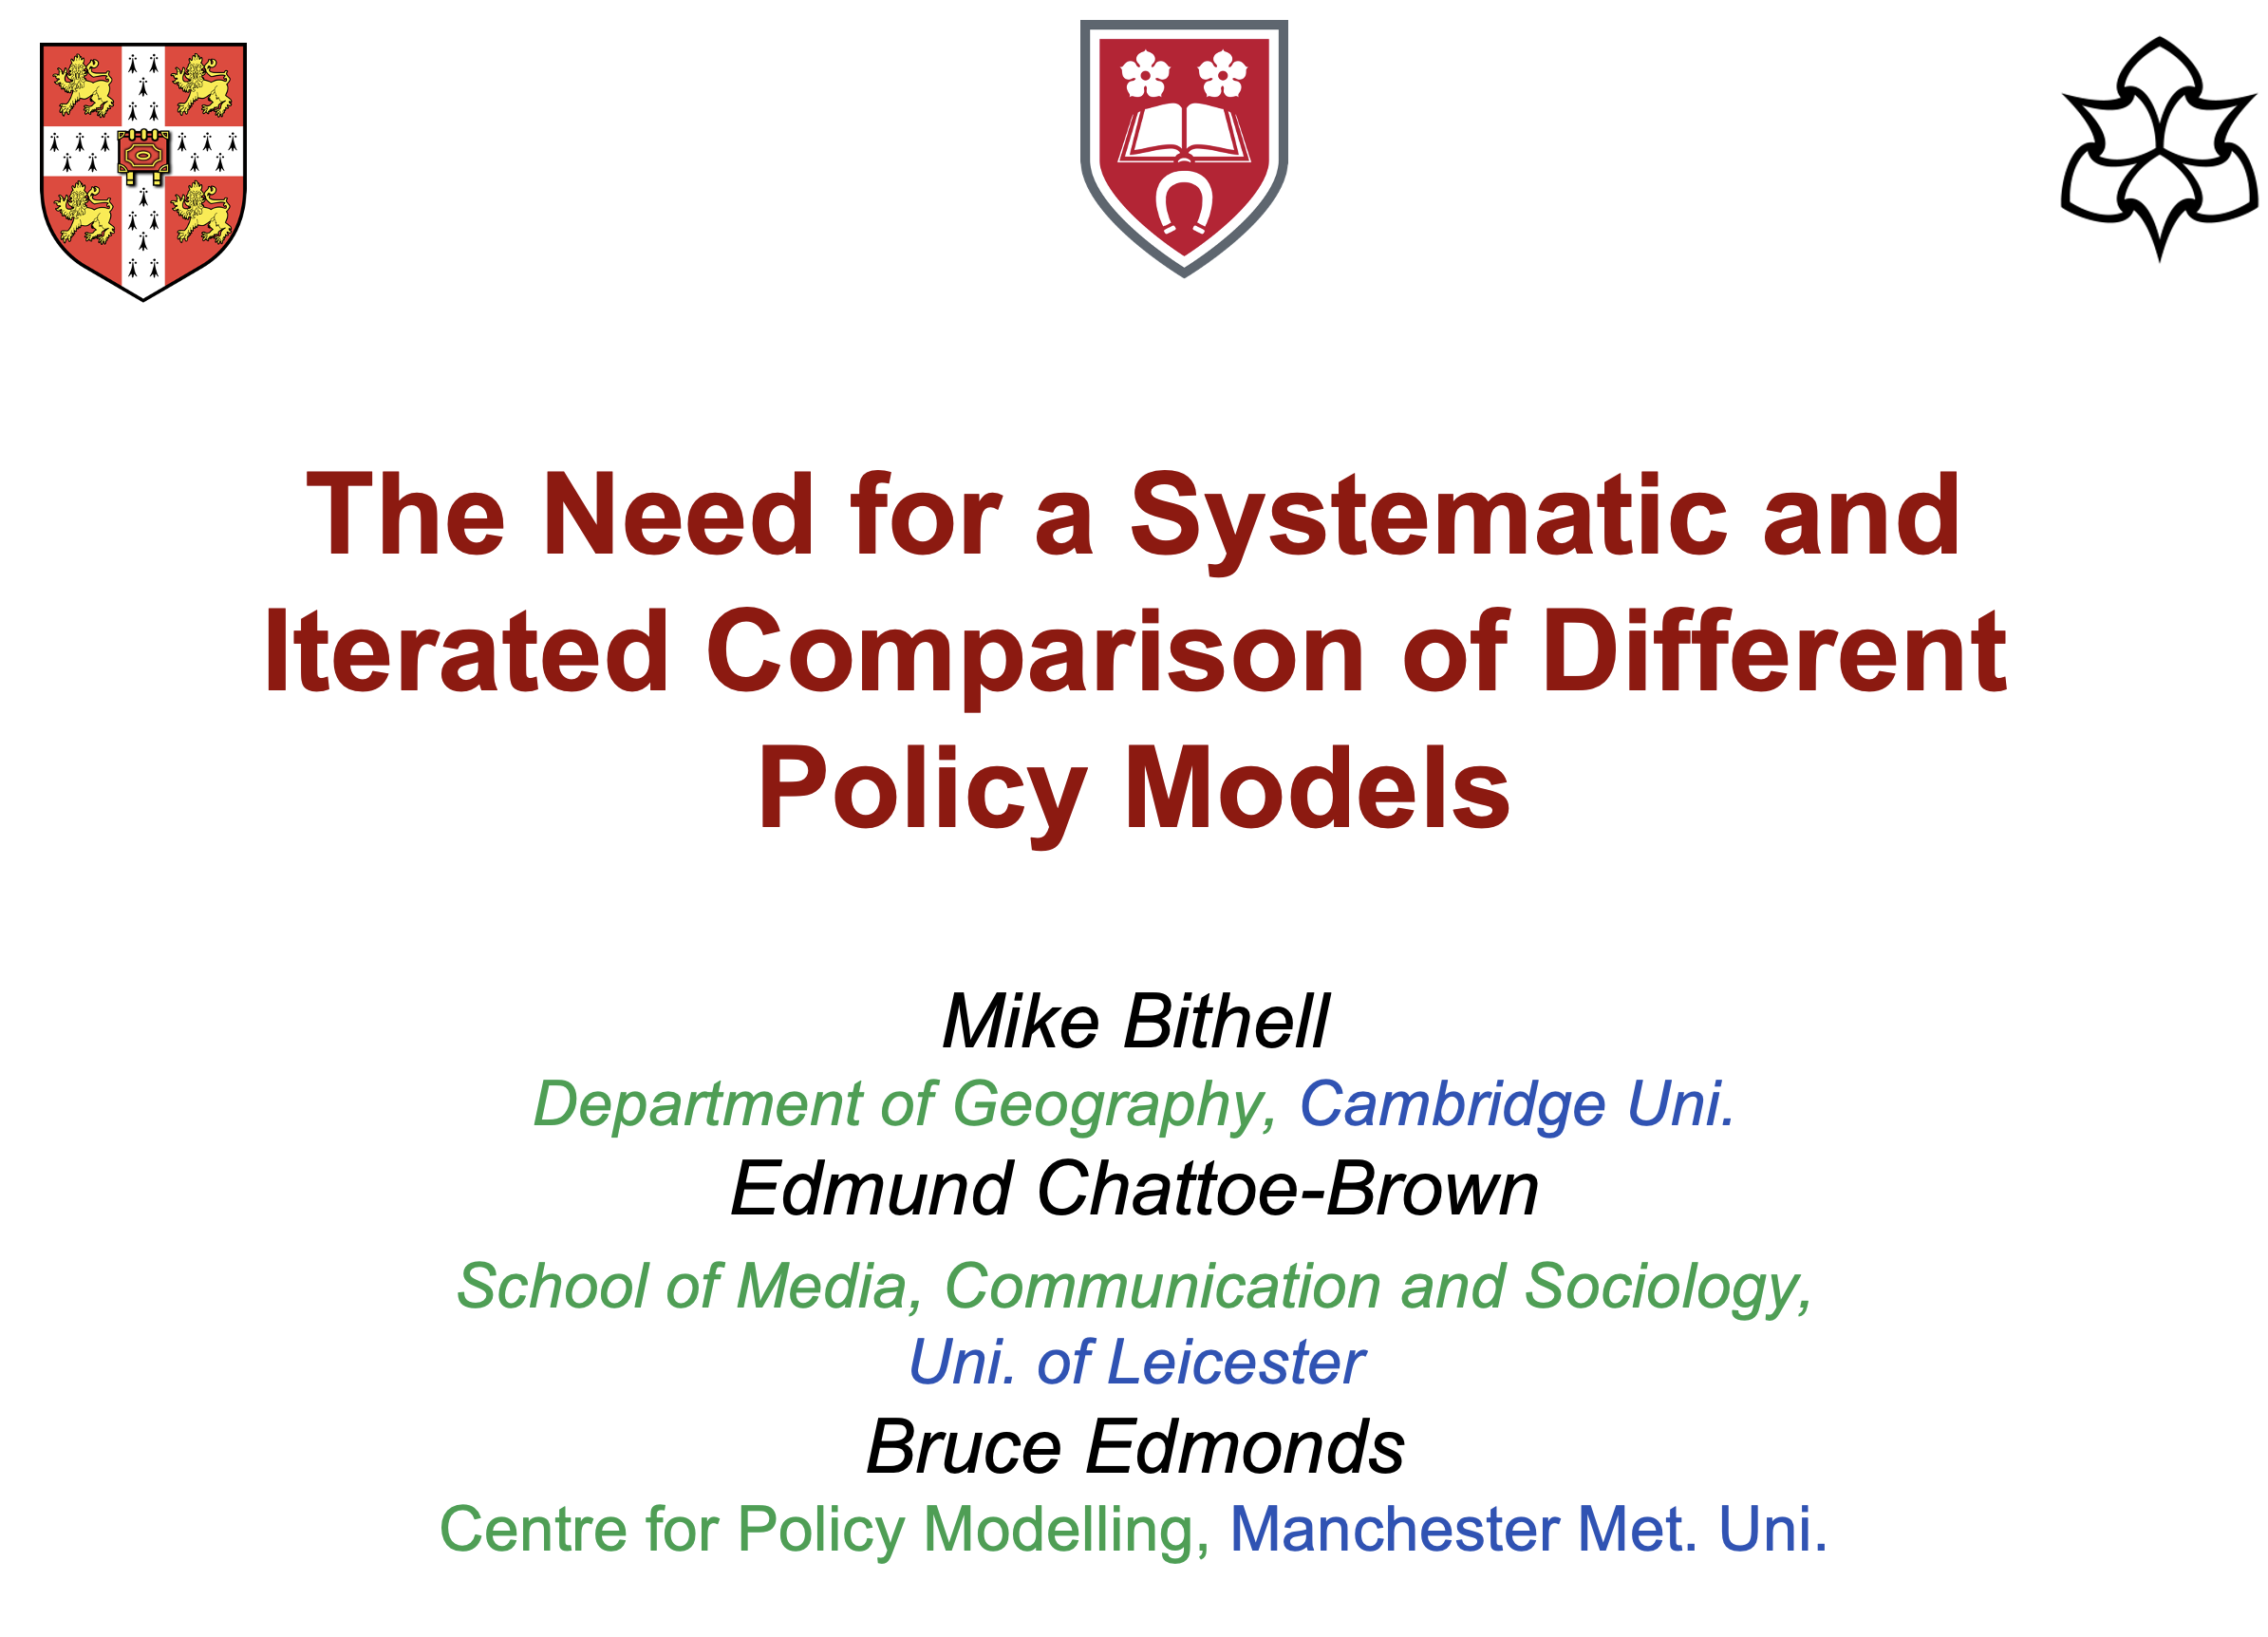 Title: The Need for a Systematic and Iterated Comparison of Different Policy Models by Mike Bithell, Edmund Chattoe-Brown and Bruce Edmonds